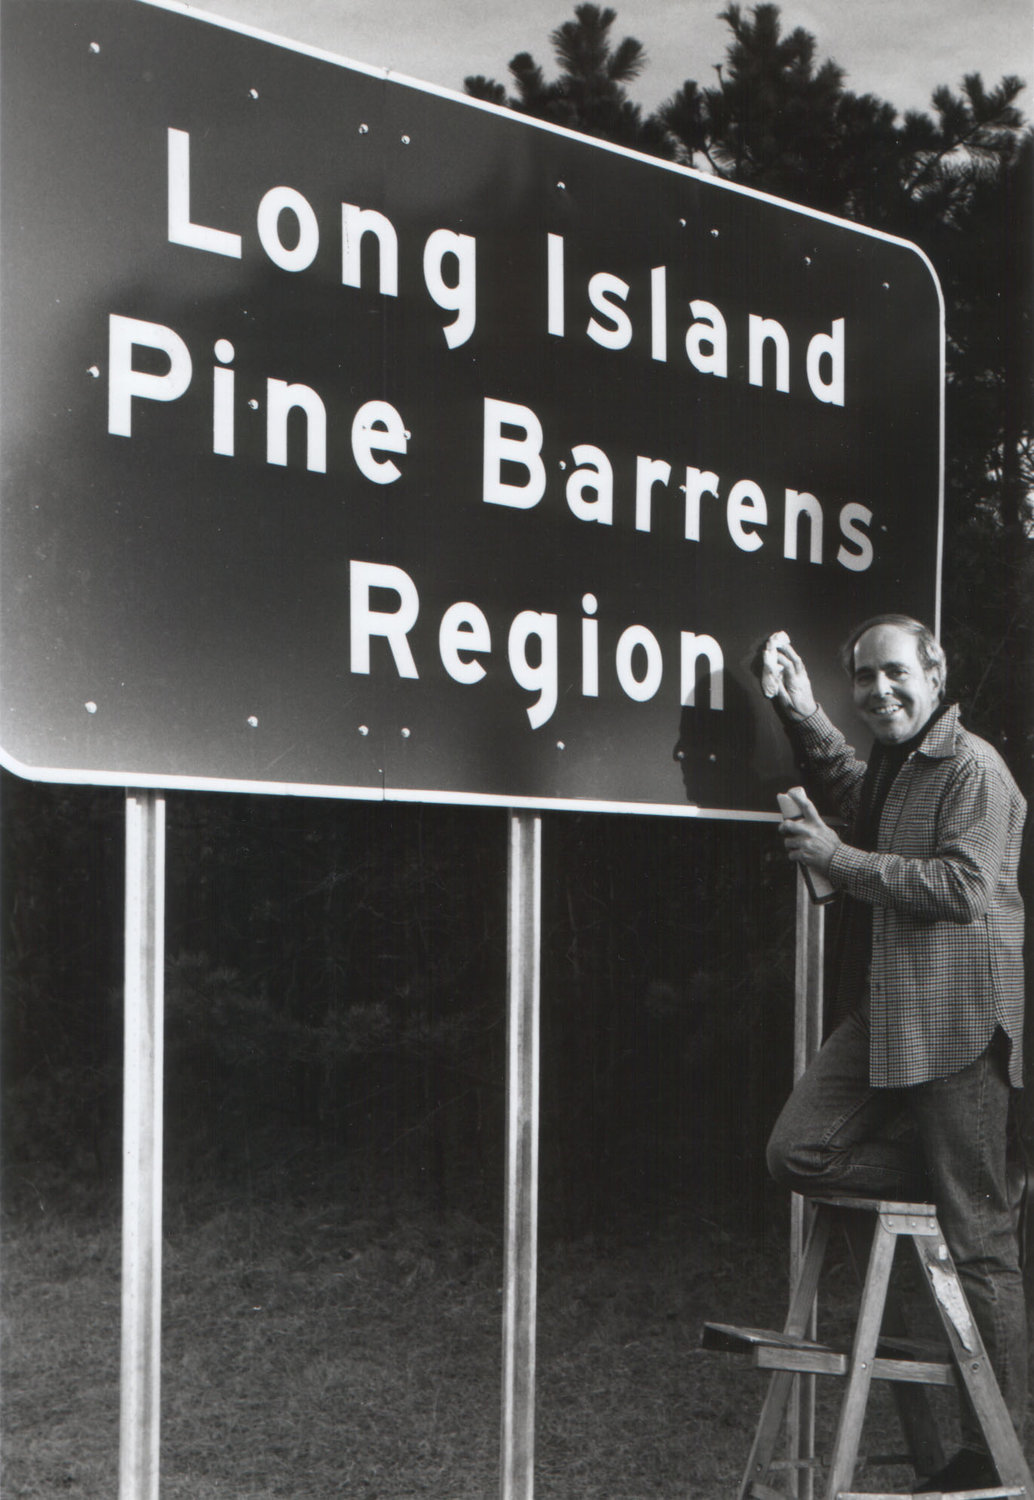 The society’s mission began on Amper’s kitchen table. Now, the Long Island Pine Barrens Society is responsible for preserving over 100,000 acres.